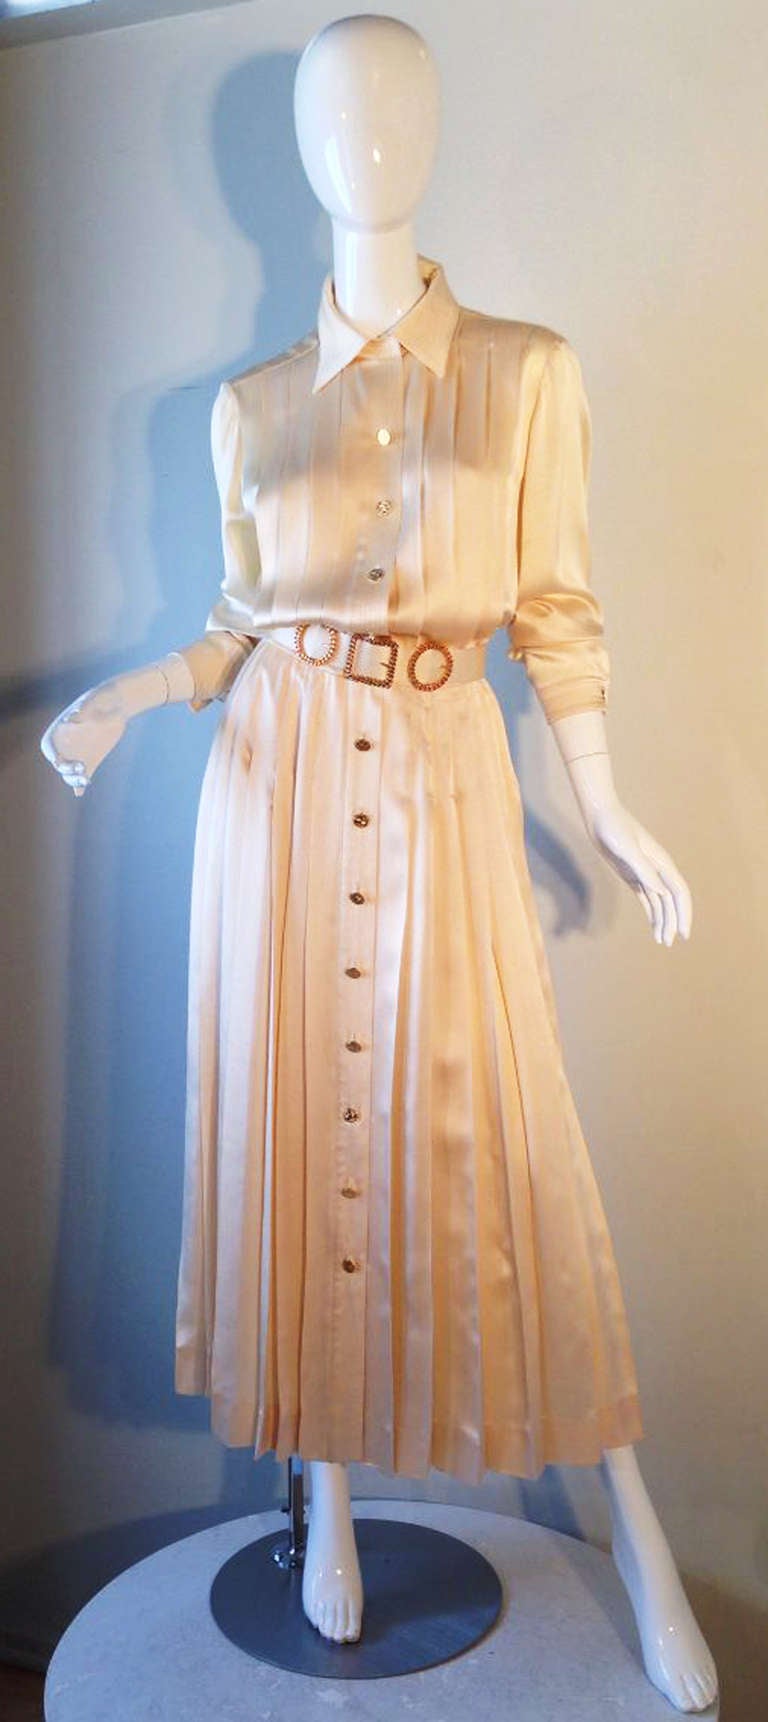 A fine and rare vintage Chanel dress and matching belt. Ivory silk charmeuse fabric dress features nipped waist, pleated bodice and tea length pleated skirt. Gilt signature button front with channel pleated collar and cuffs. Rare original matching